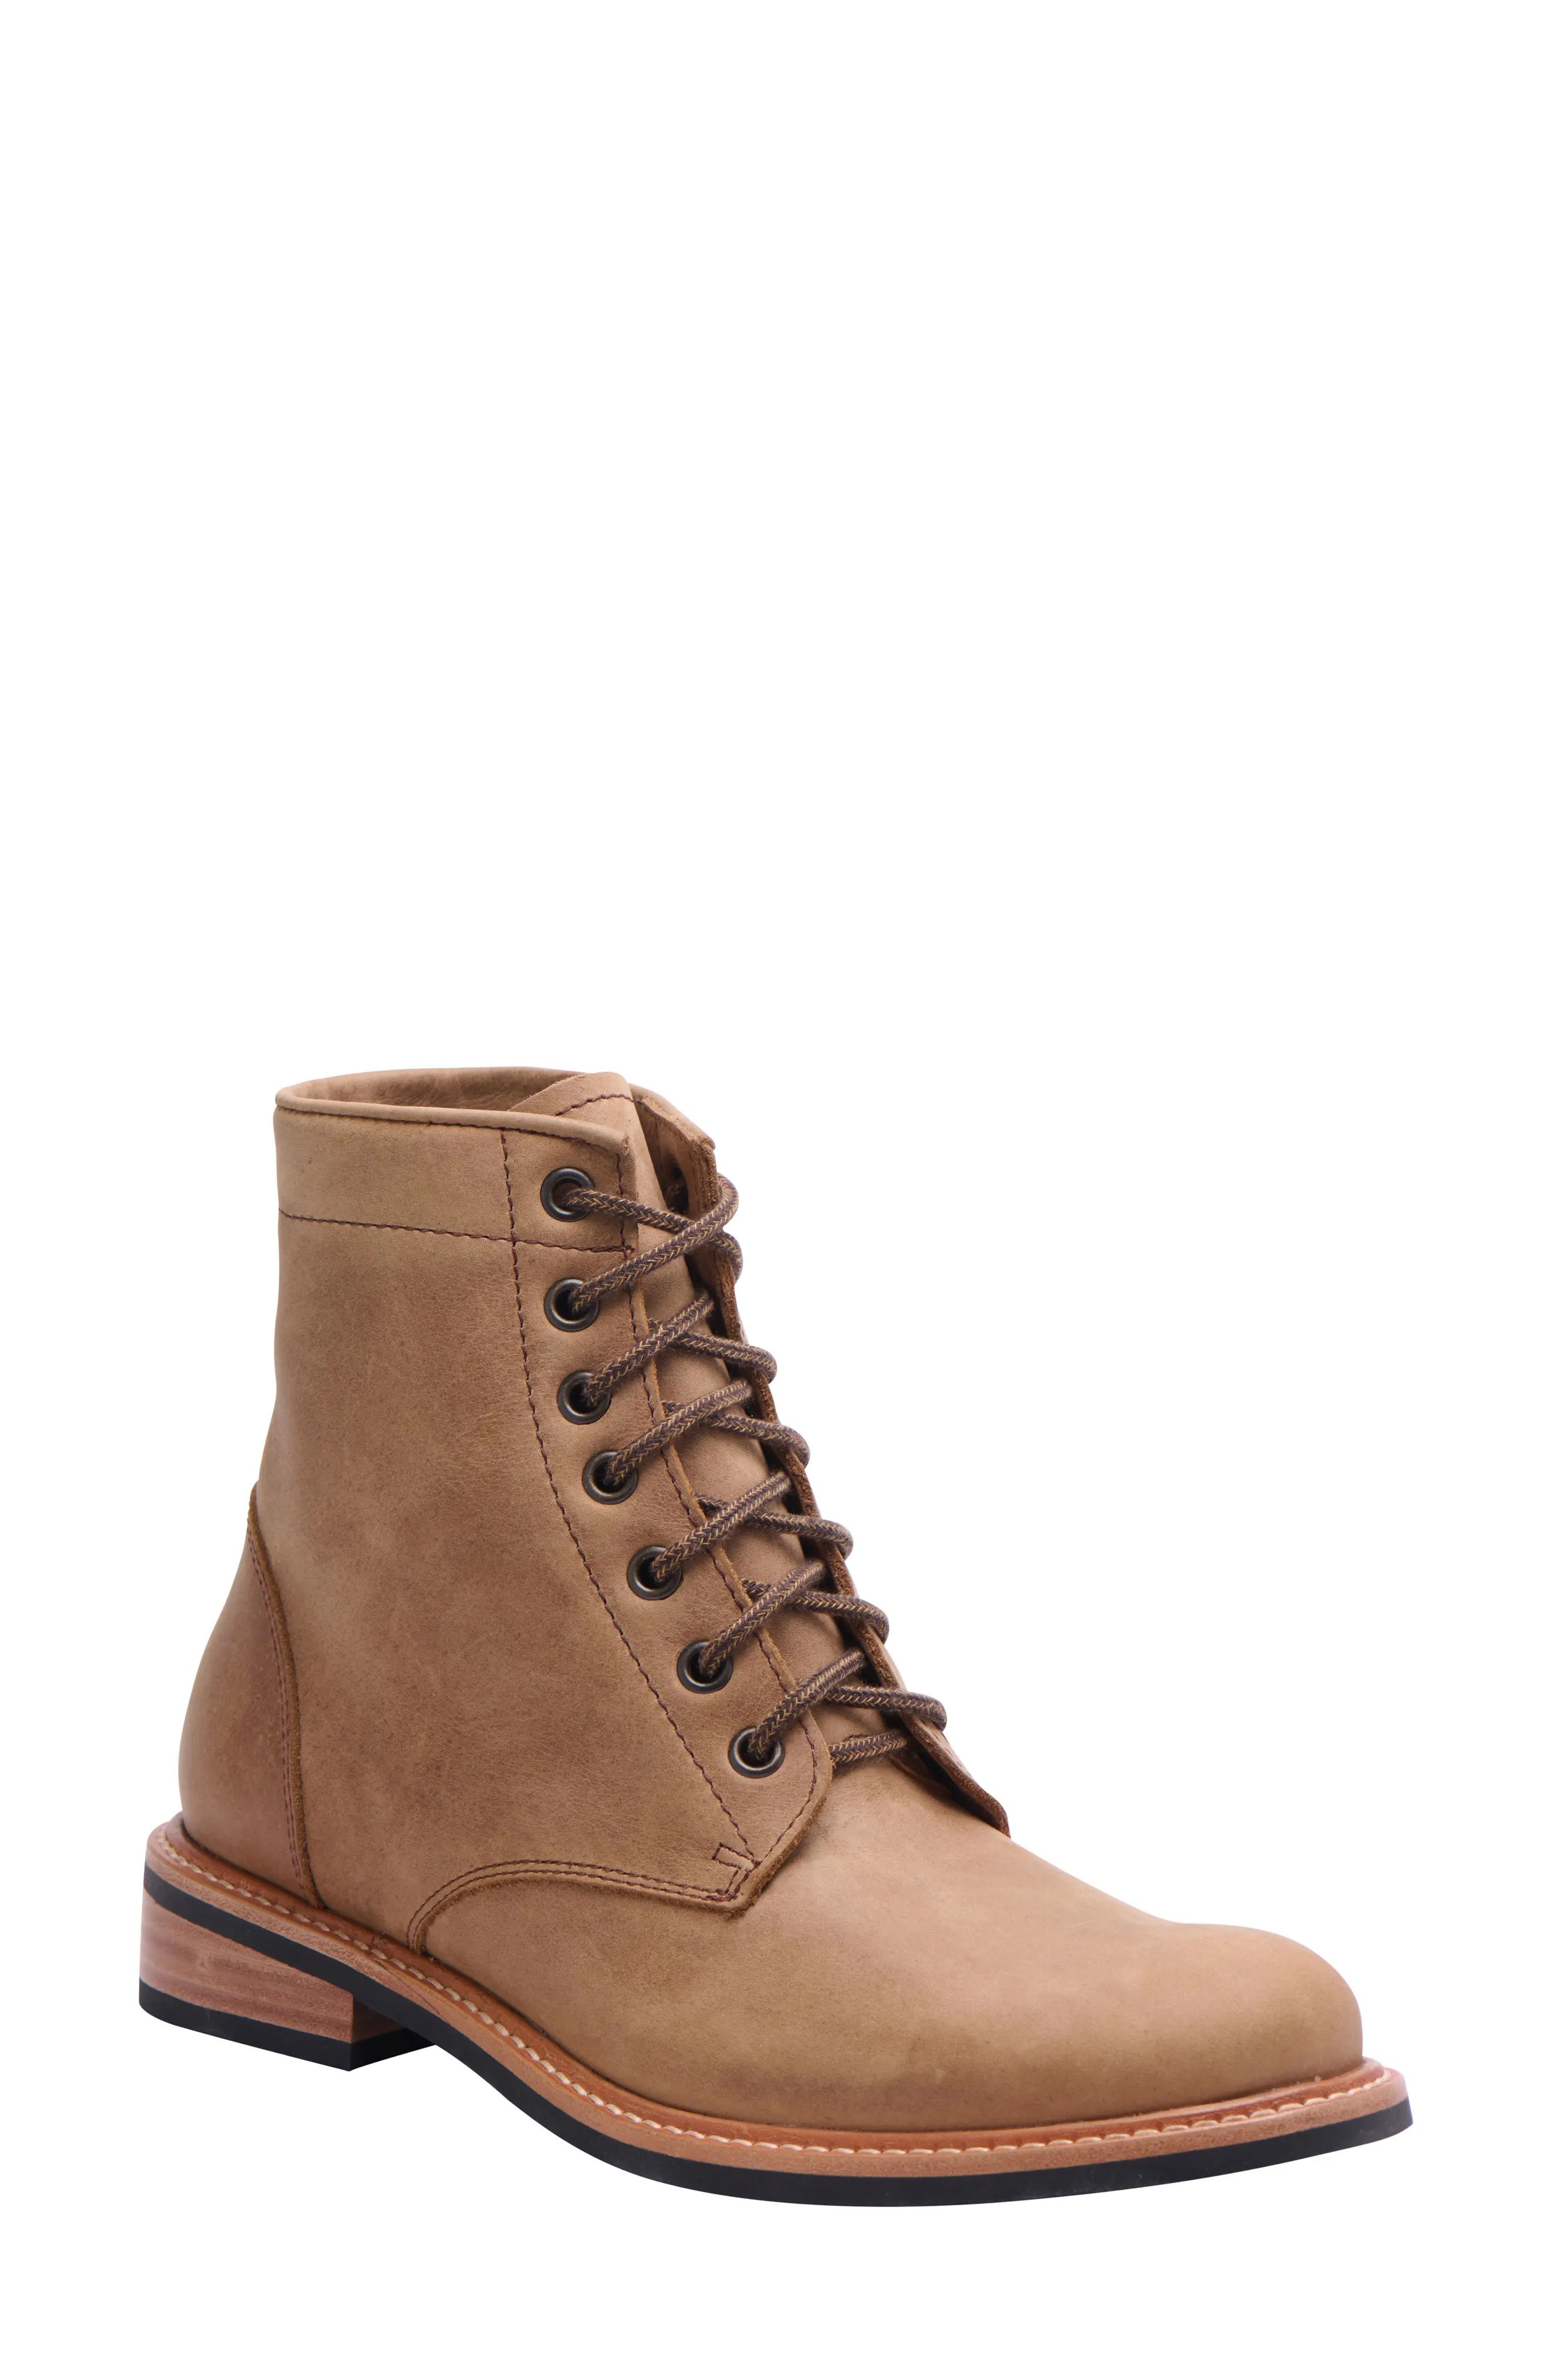 Nisolo Amalia Water Resistant Boot, Size 8 in Tobacco at Nordstrom | Nordstrom